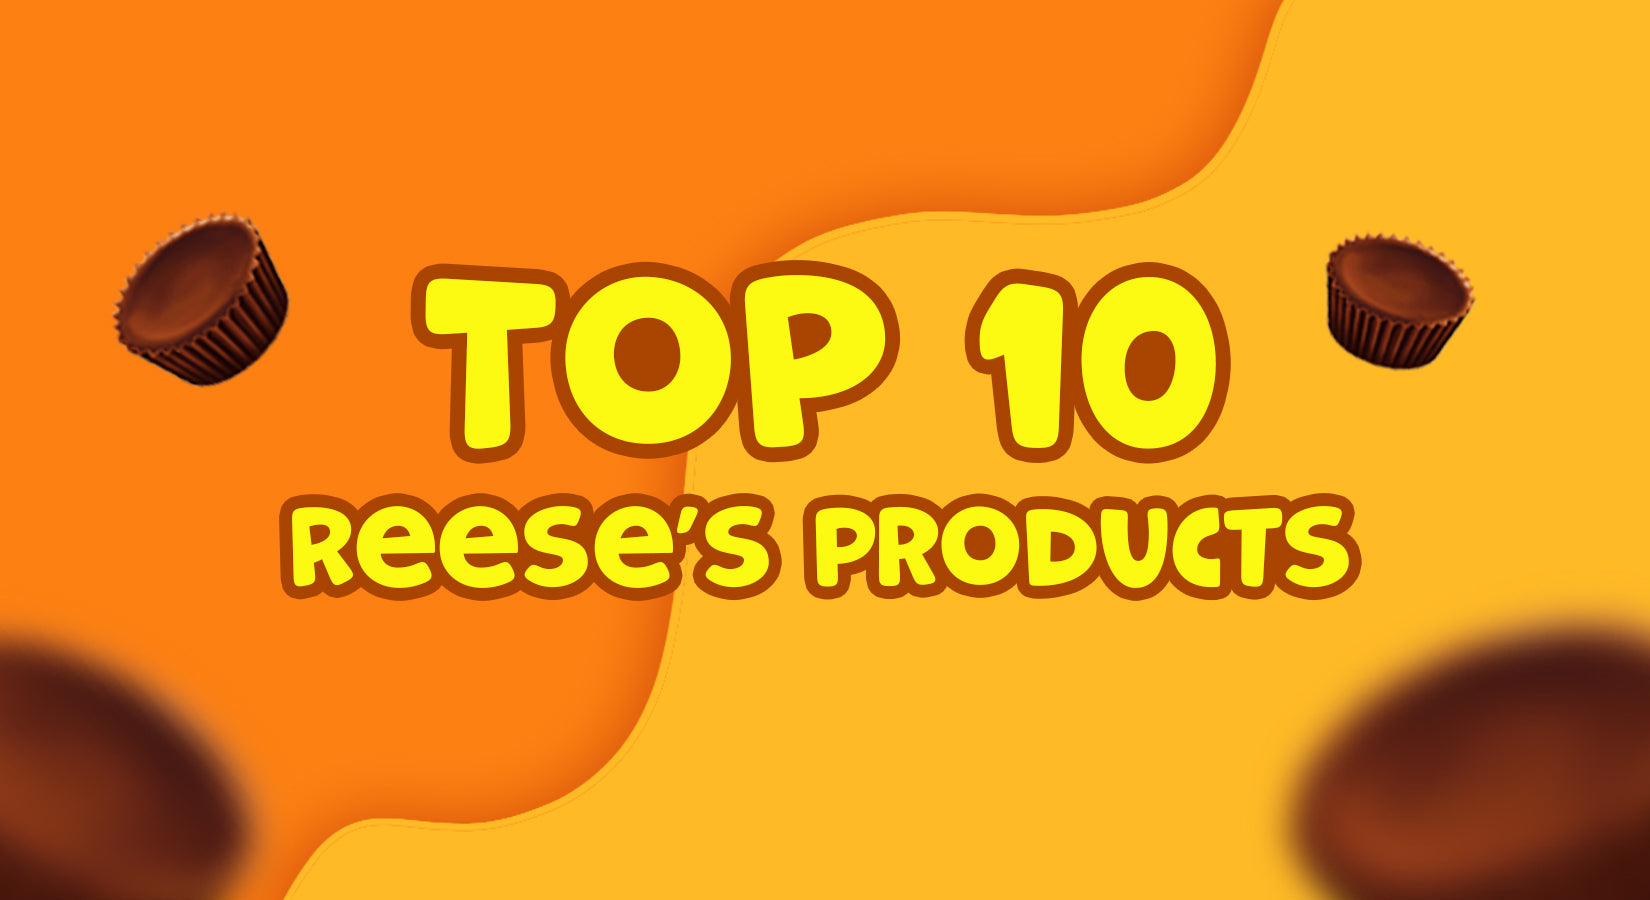 The Top 10 Reese's Products